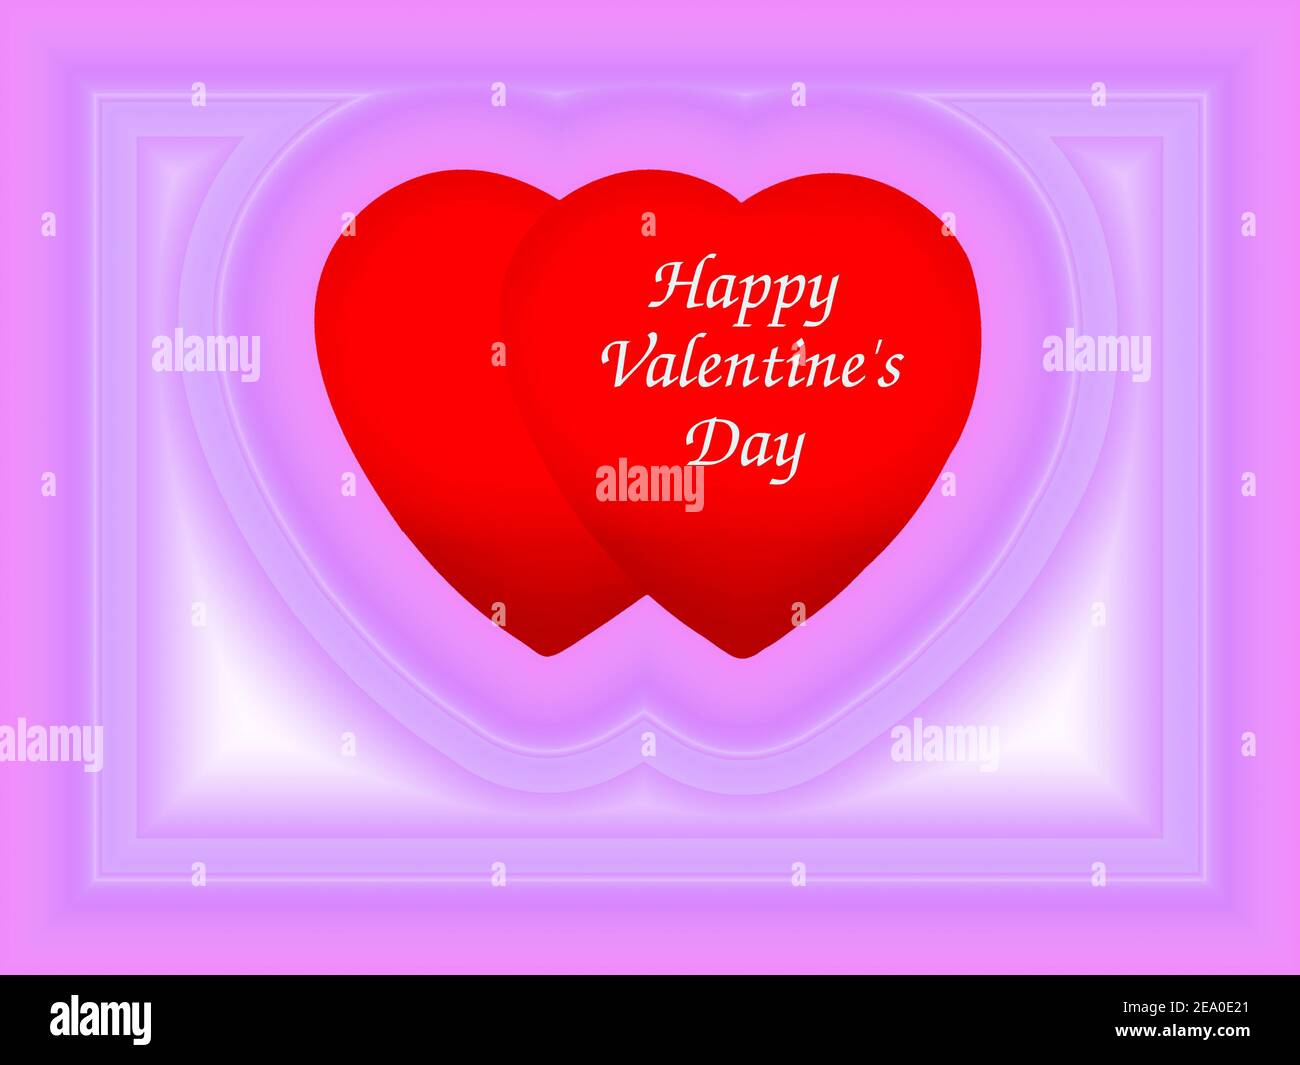 Valentine's day greeting illustration including two large joined red hearts and from outline similar heart shape in purple color Stock Photo